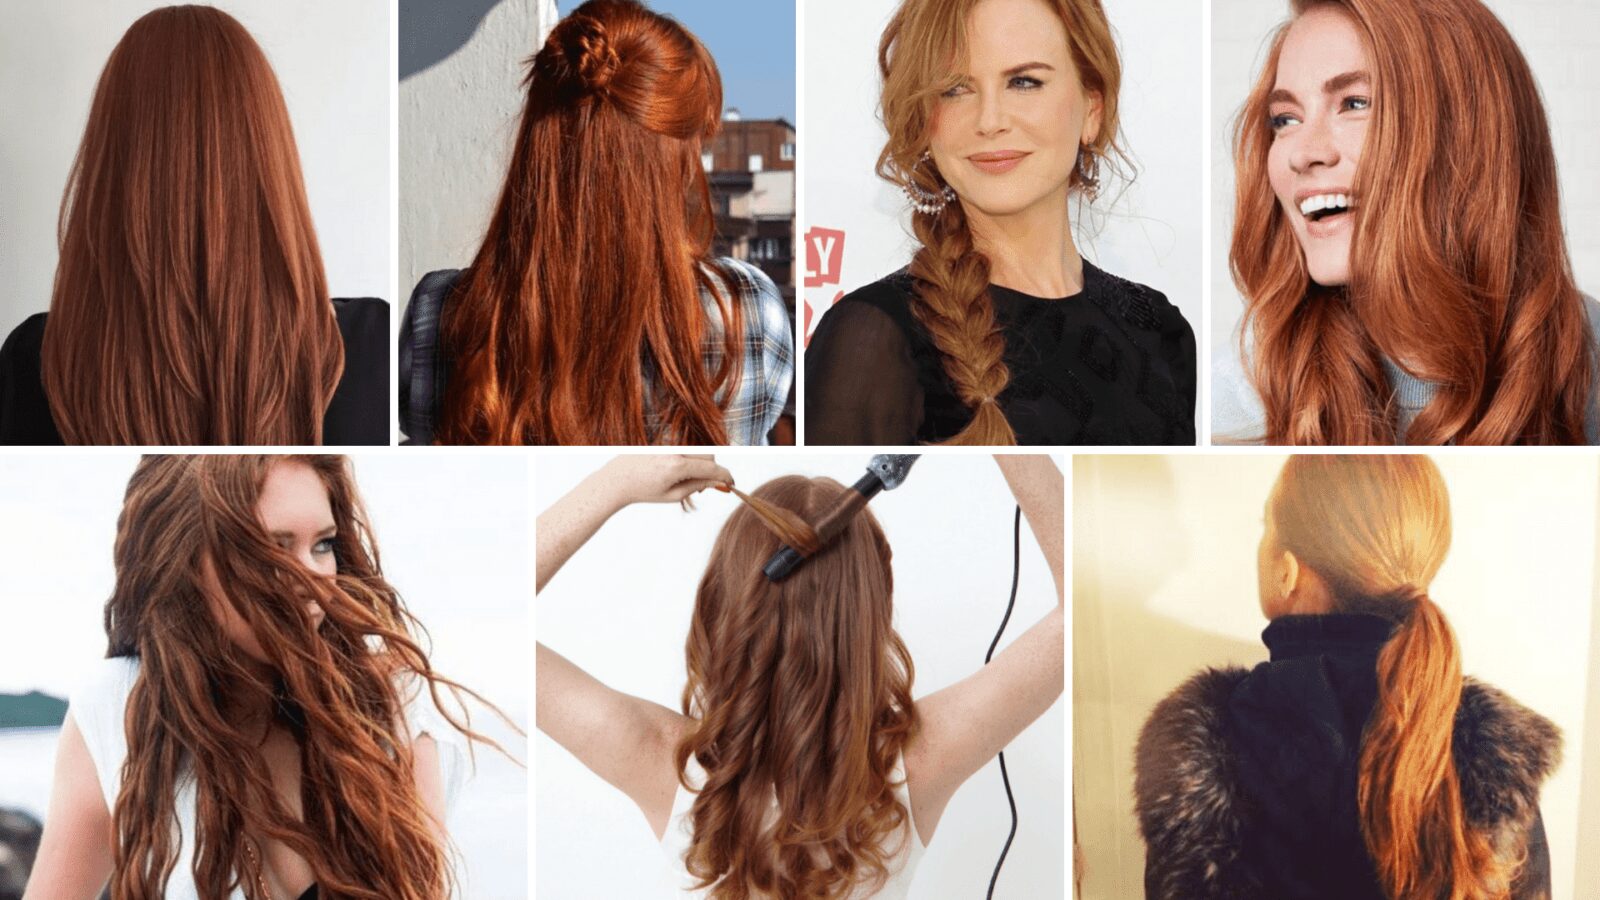 Redhead Hairstyles - 7 Easy Styles To Wash Your Hair Twice in a Week